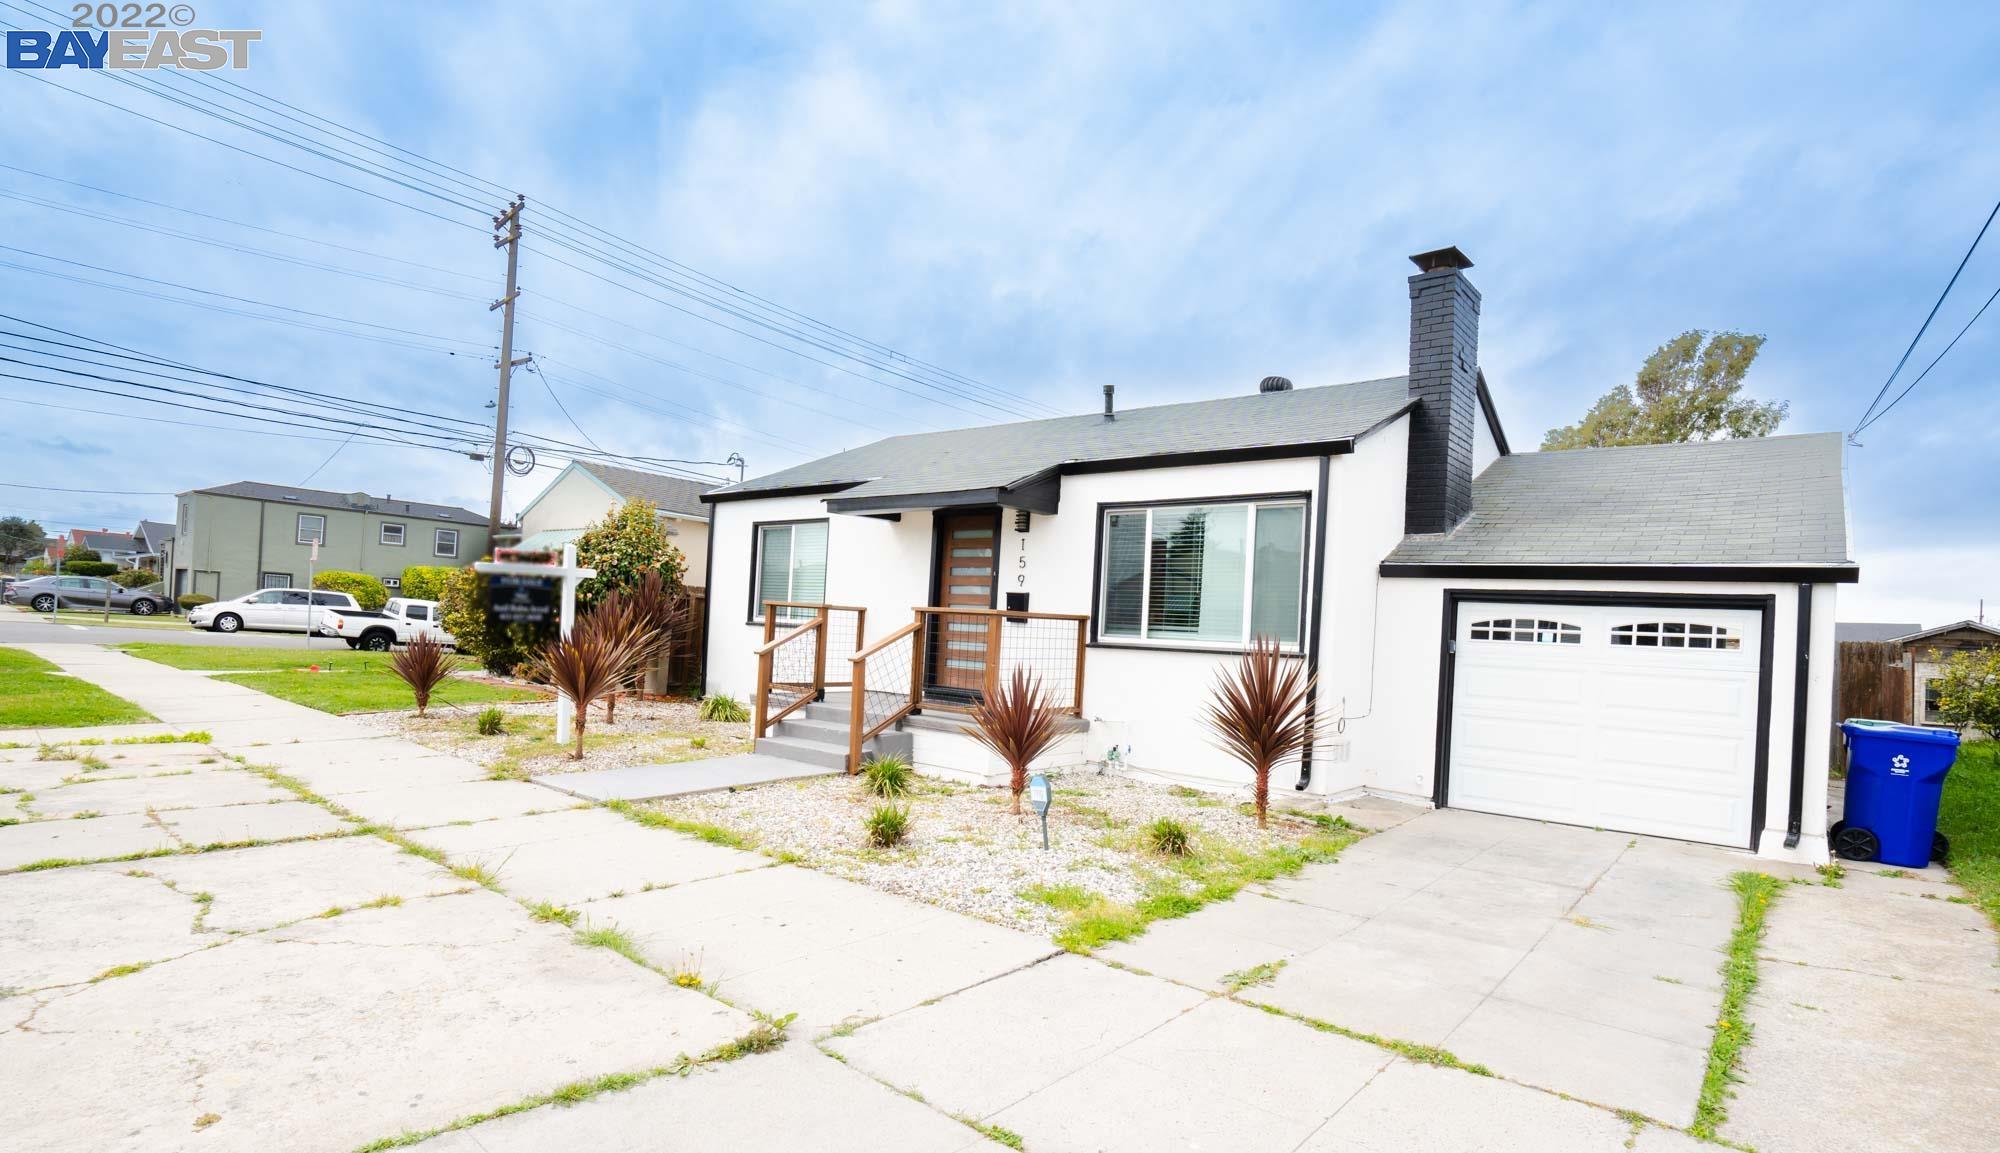 Photo of 159 S 35th St in Richmond, CA